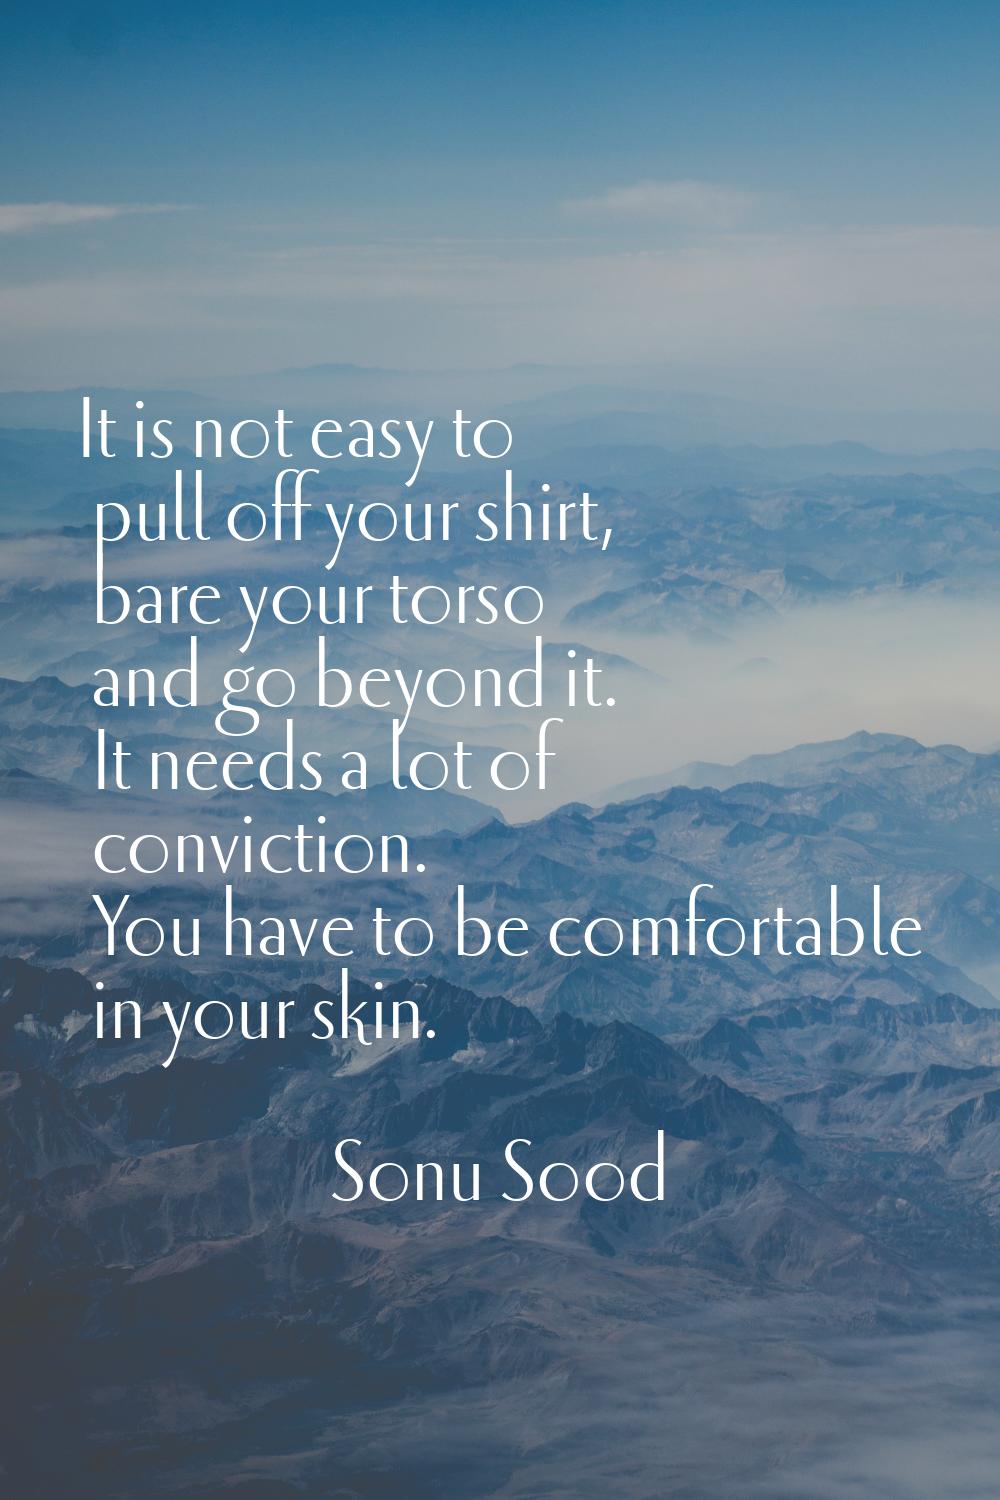 It is not easy to pull off your shirt, bare your torso and go beyond it. It needs a lot of convicti